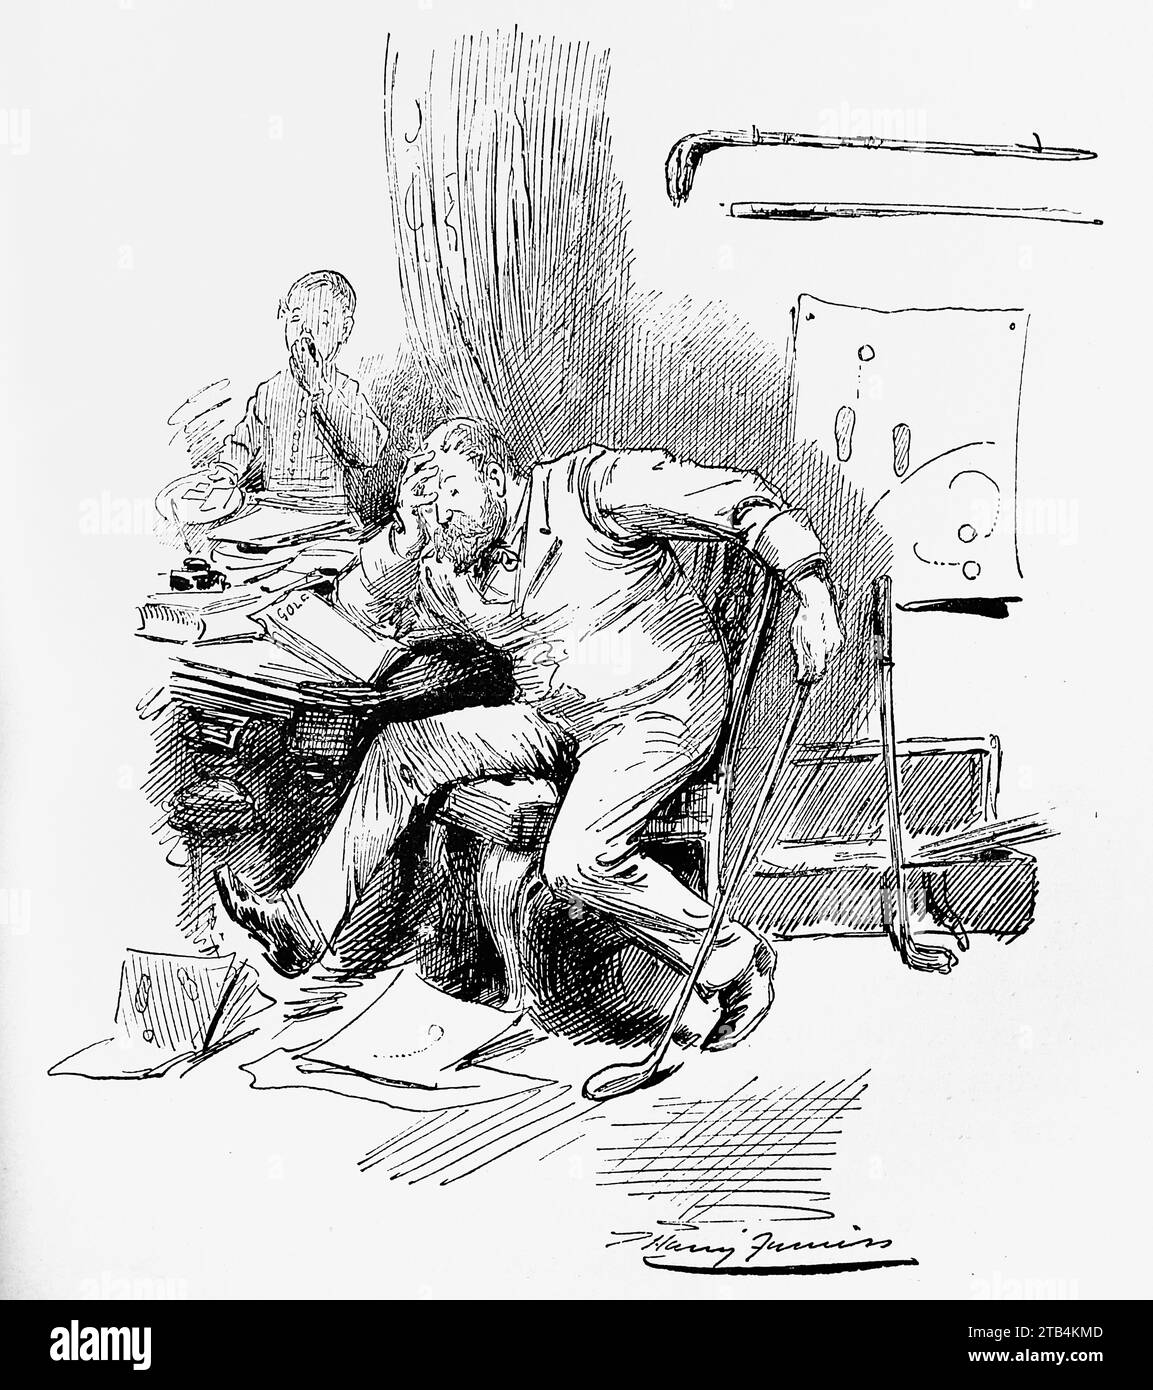 A Bad Case, by H. Furniss. From an illustration about golf, dating from 1889 to 1901. The history of golf is a long one. Though its origins are disputed, historians are generally agreed that what is known as “modern” golf began in the Middle Ages in Scotland. It was not until the mid to late nineteenth century that this sport became more popular in wider Britain, the British Empire and then the United States. Over the years the humble golf ball and golf club have changed vastly. Stock Photo